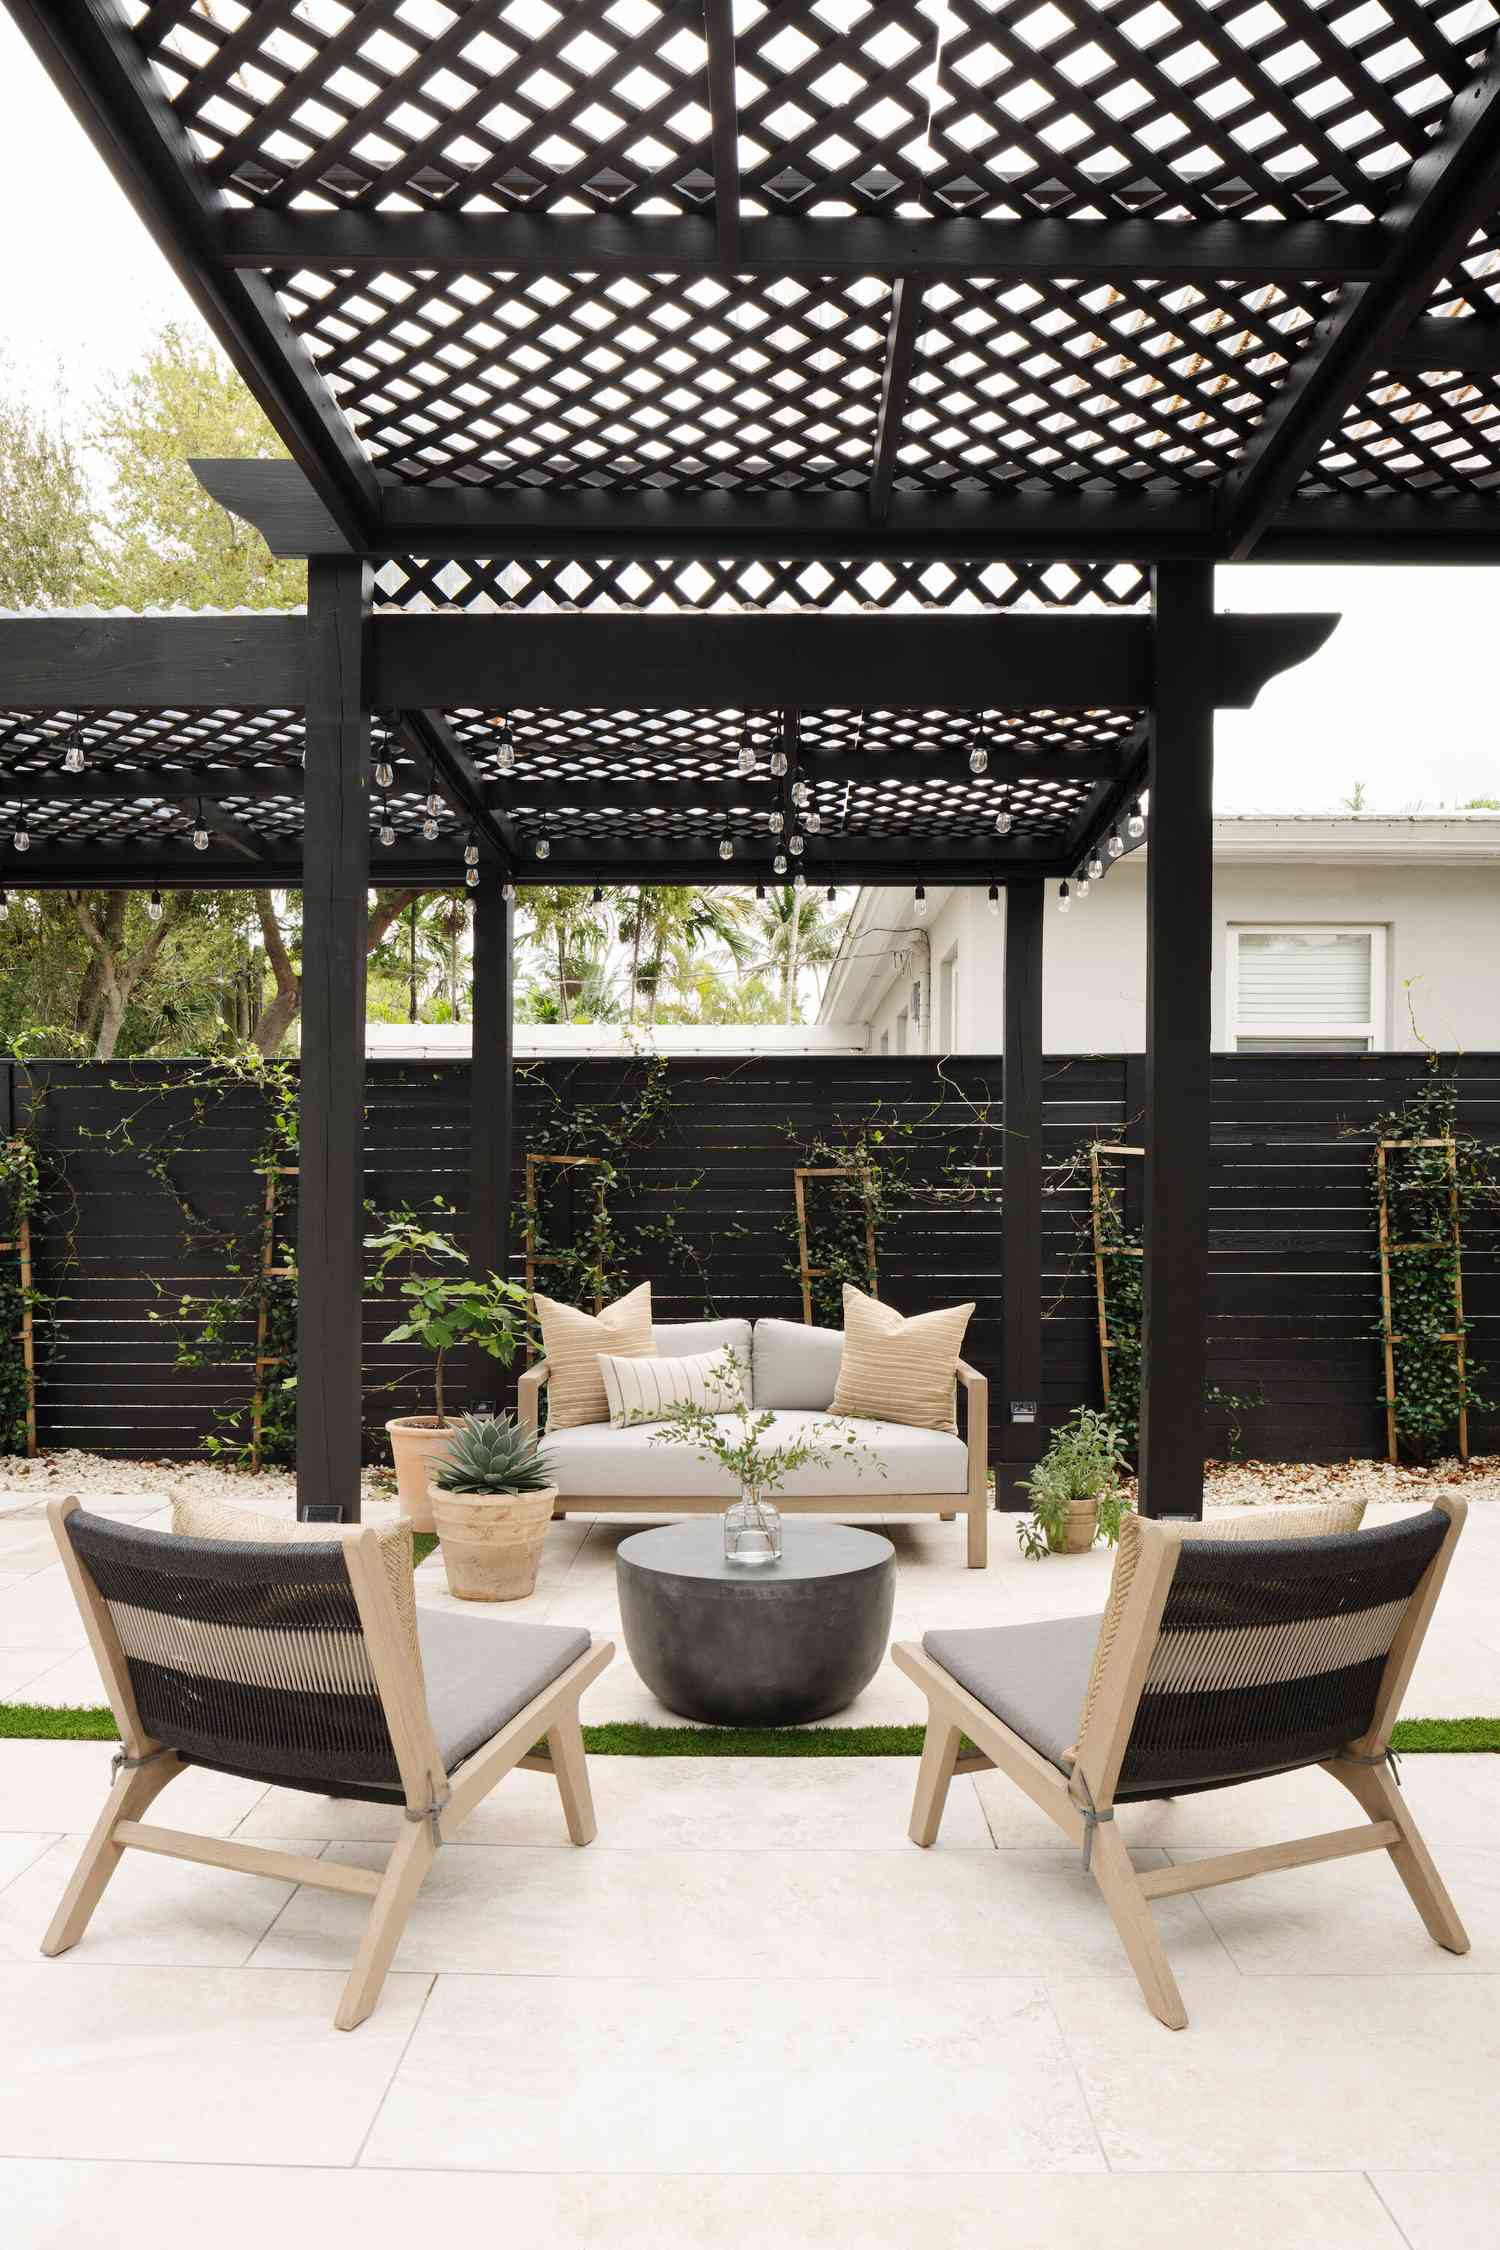 Black pergola and fence with a white house behind it